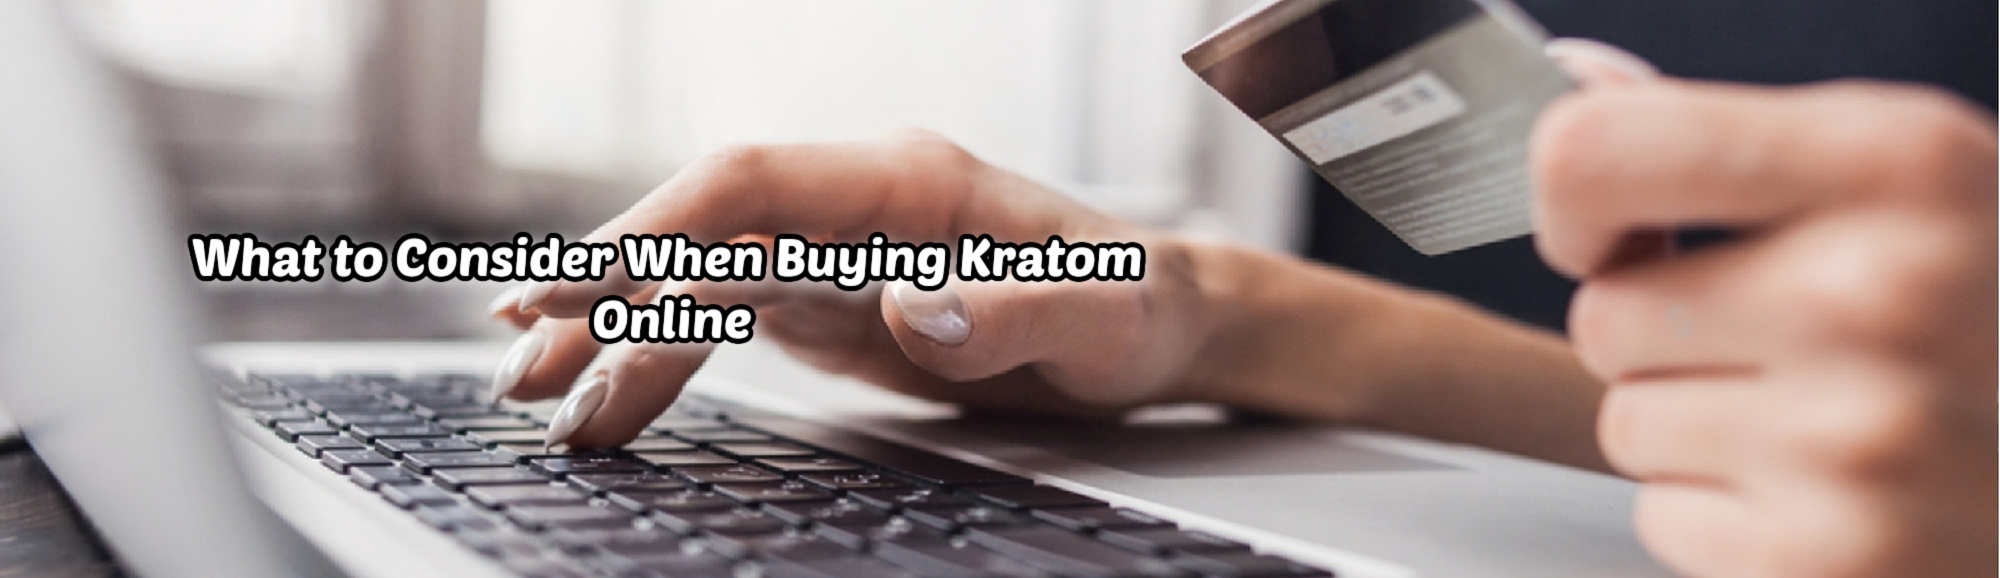 image of what to consider when buying kratom online